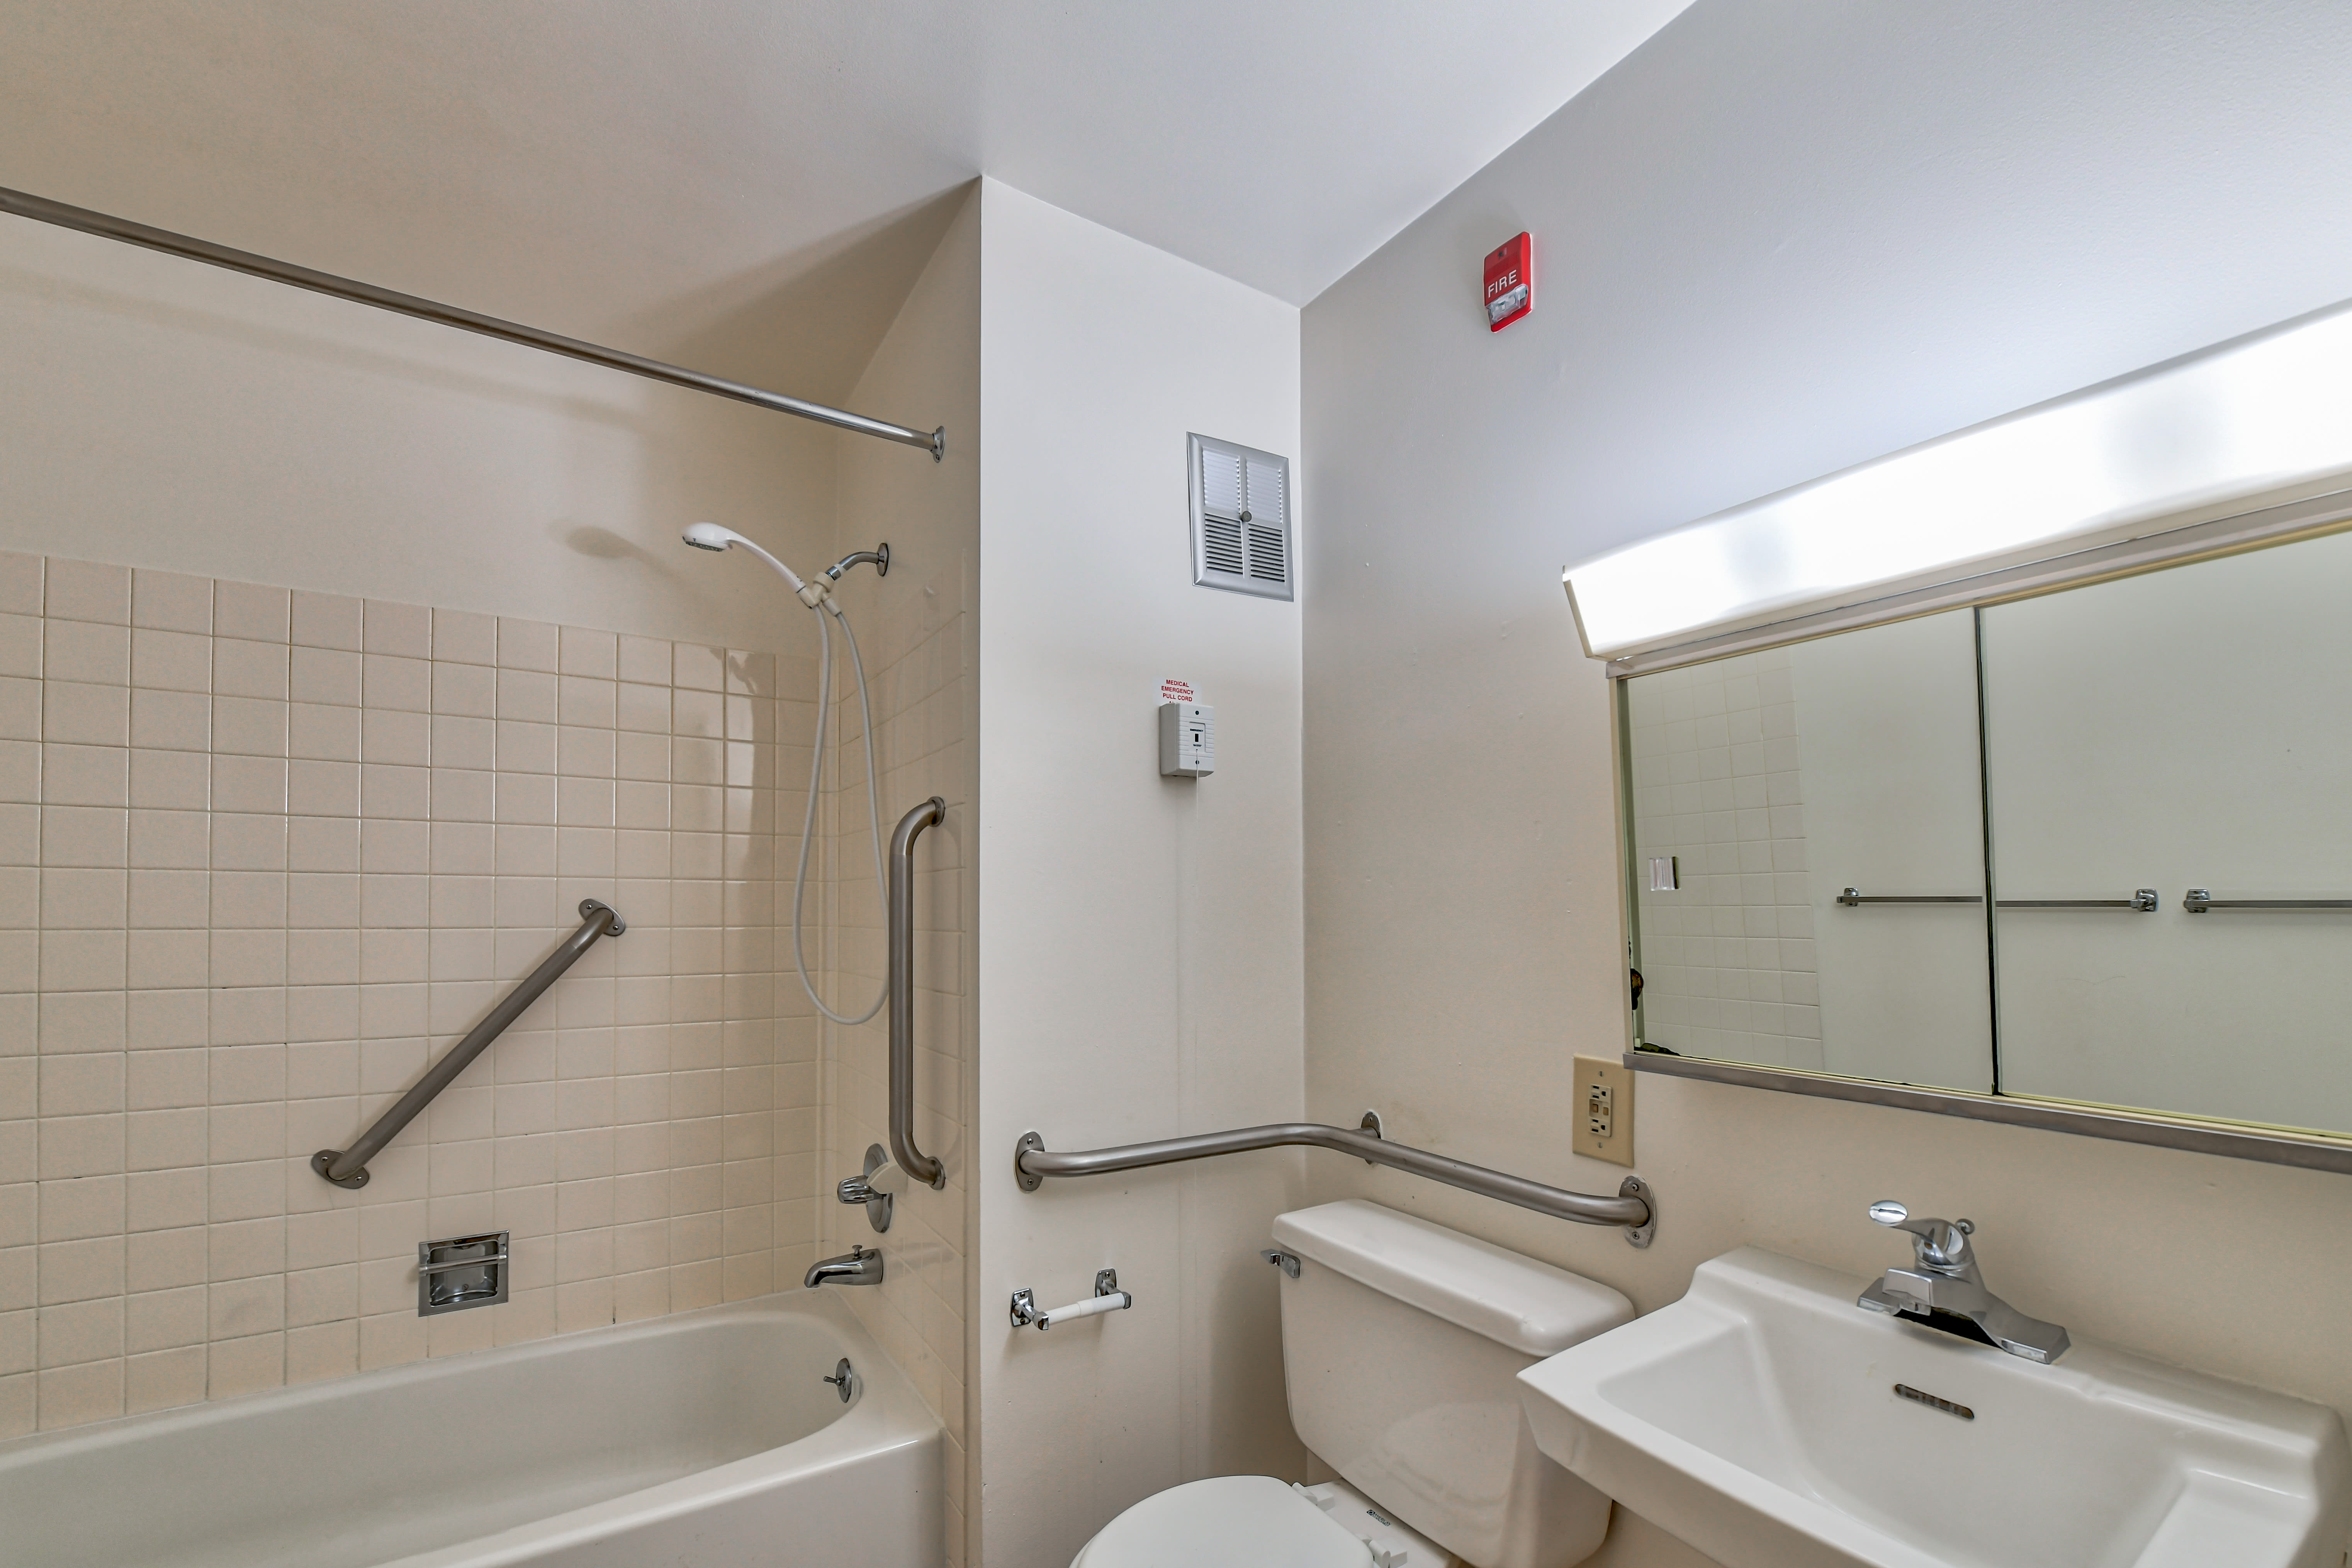 Bathroom with a vanity and tub/shower combination in a model home at Citizen's Plaza in New Kensington, Pennsylvania